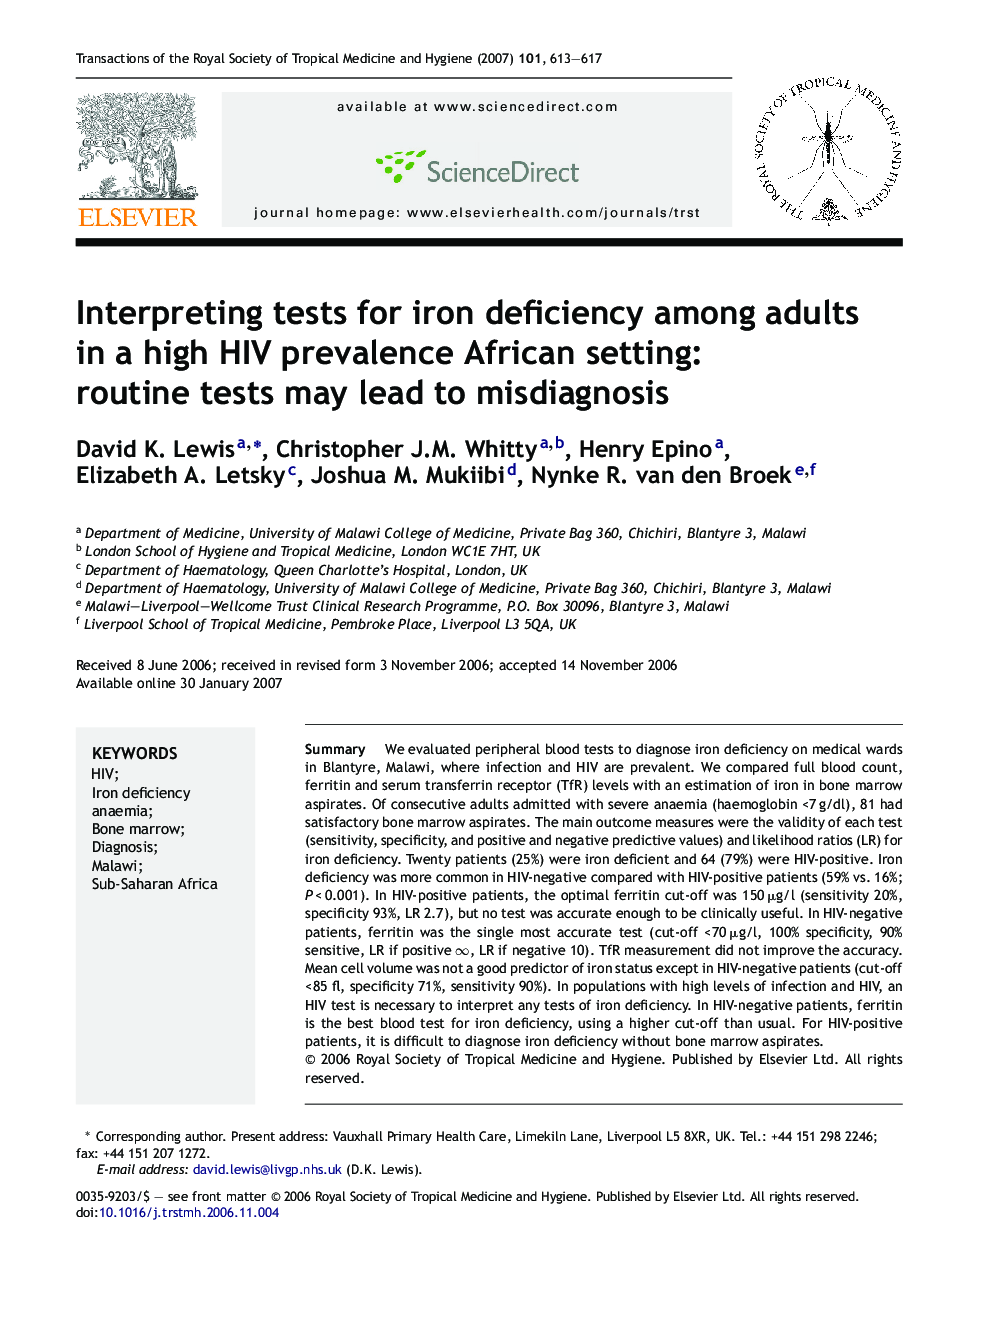 Interpreting tests for iron deficiency among adults in a high HIV prevalence African setting: routine tests may lead to misdiagnosis